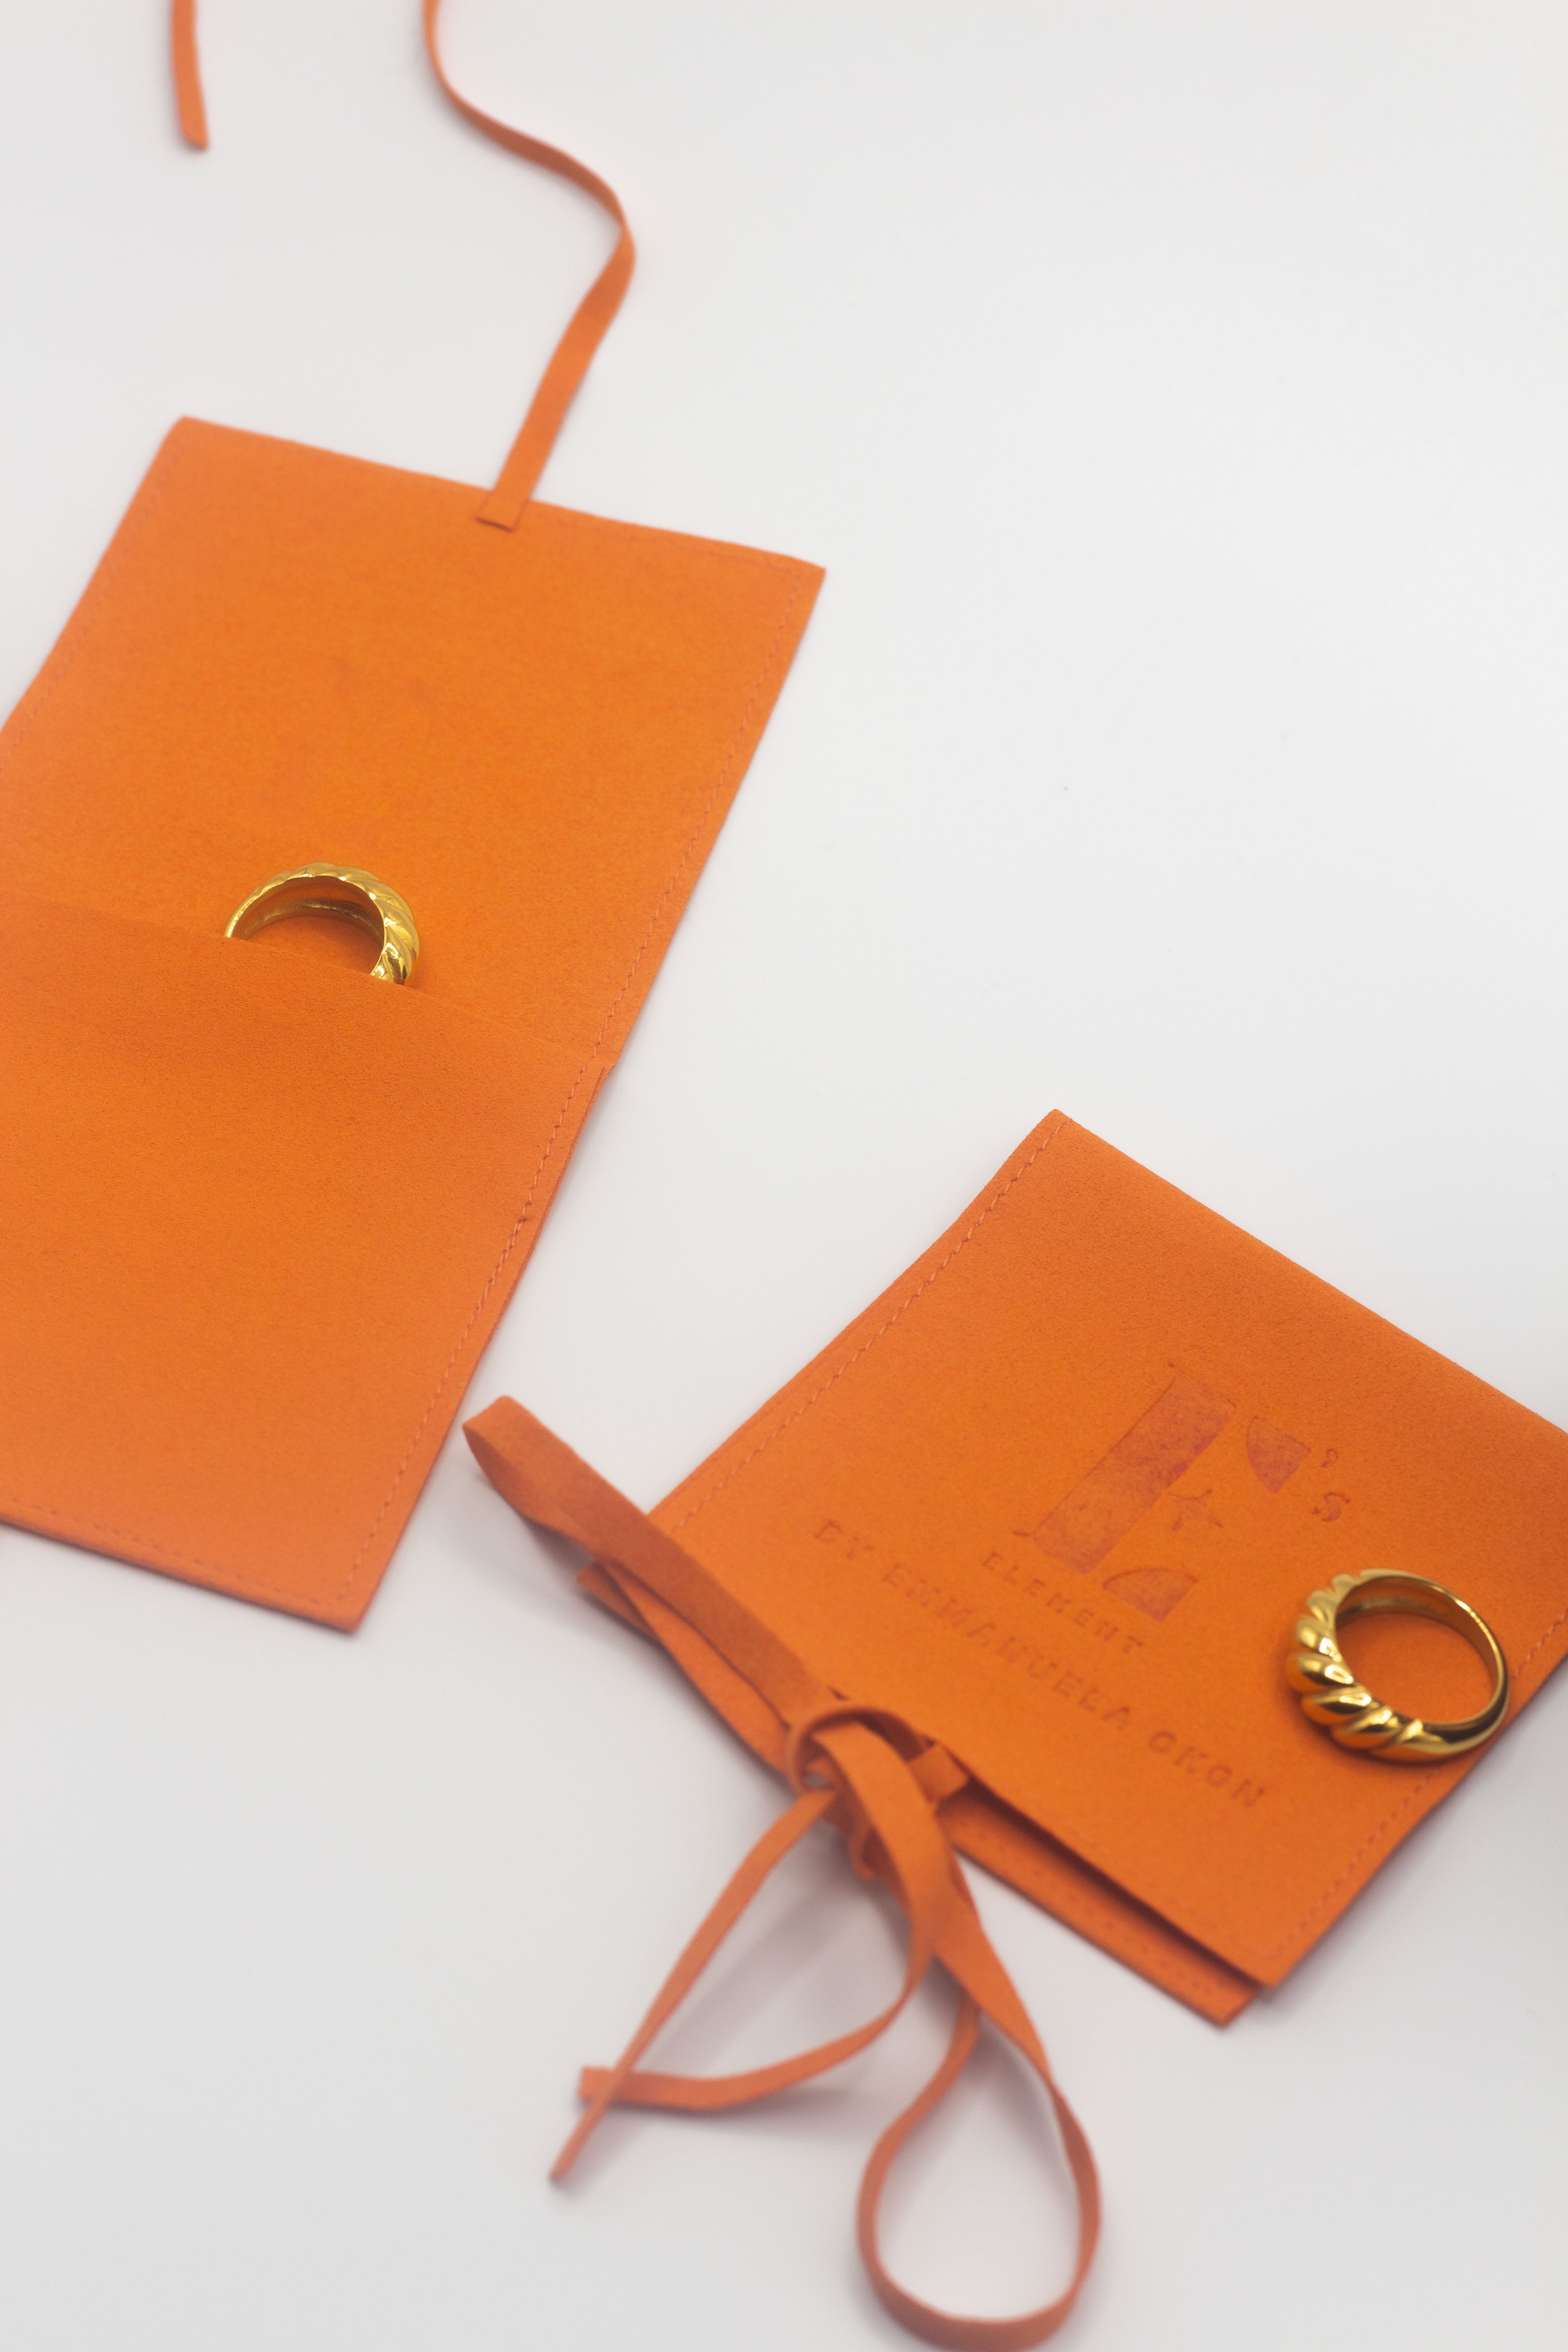 On the left is an 18k gold ring resting inside of an orange leather microfiber pouch. On the right is an 18k gold ring resting on an orange microfiber pouch with the E's Element logo engraved. Microfiber Jewelry Pouch by E's Element.